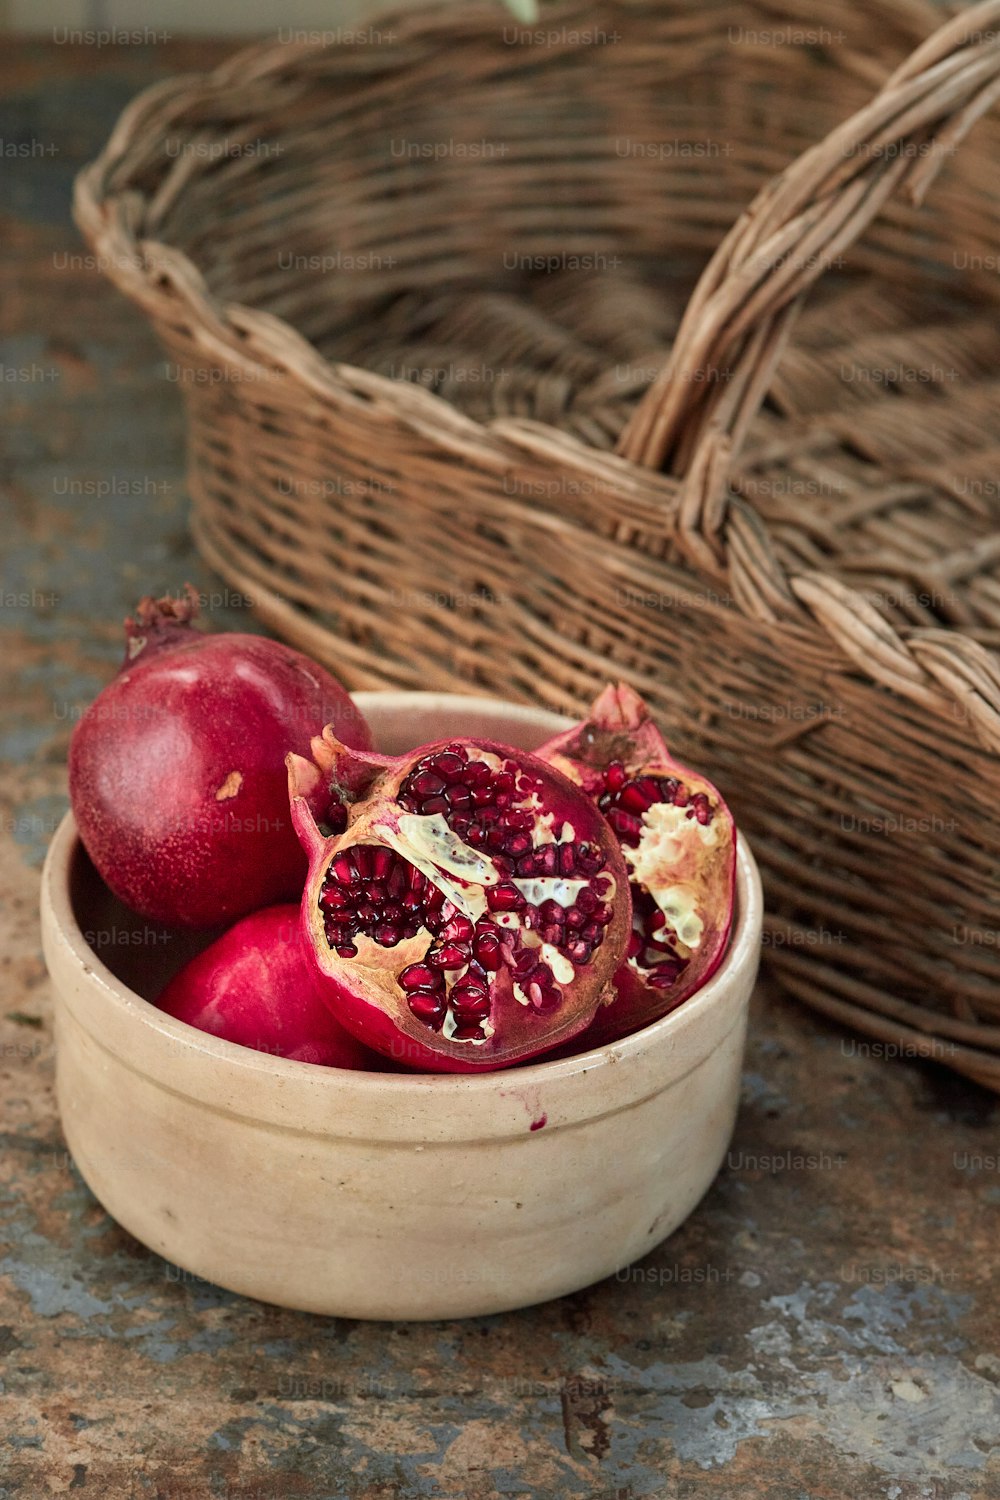 a wooden bowl filled with pomegranate next to a wicker basket